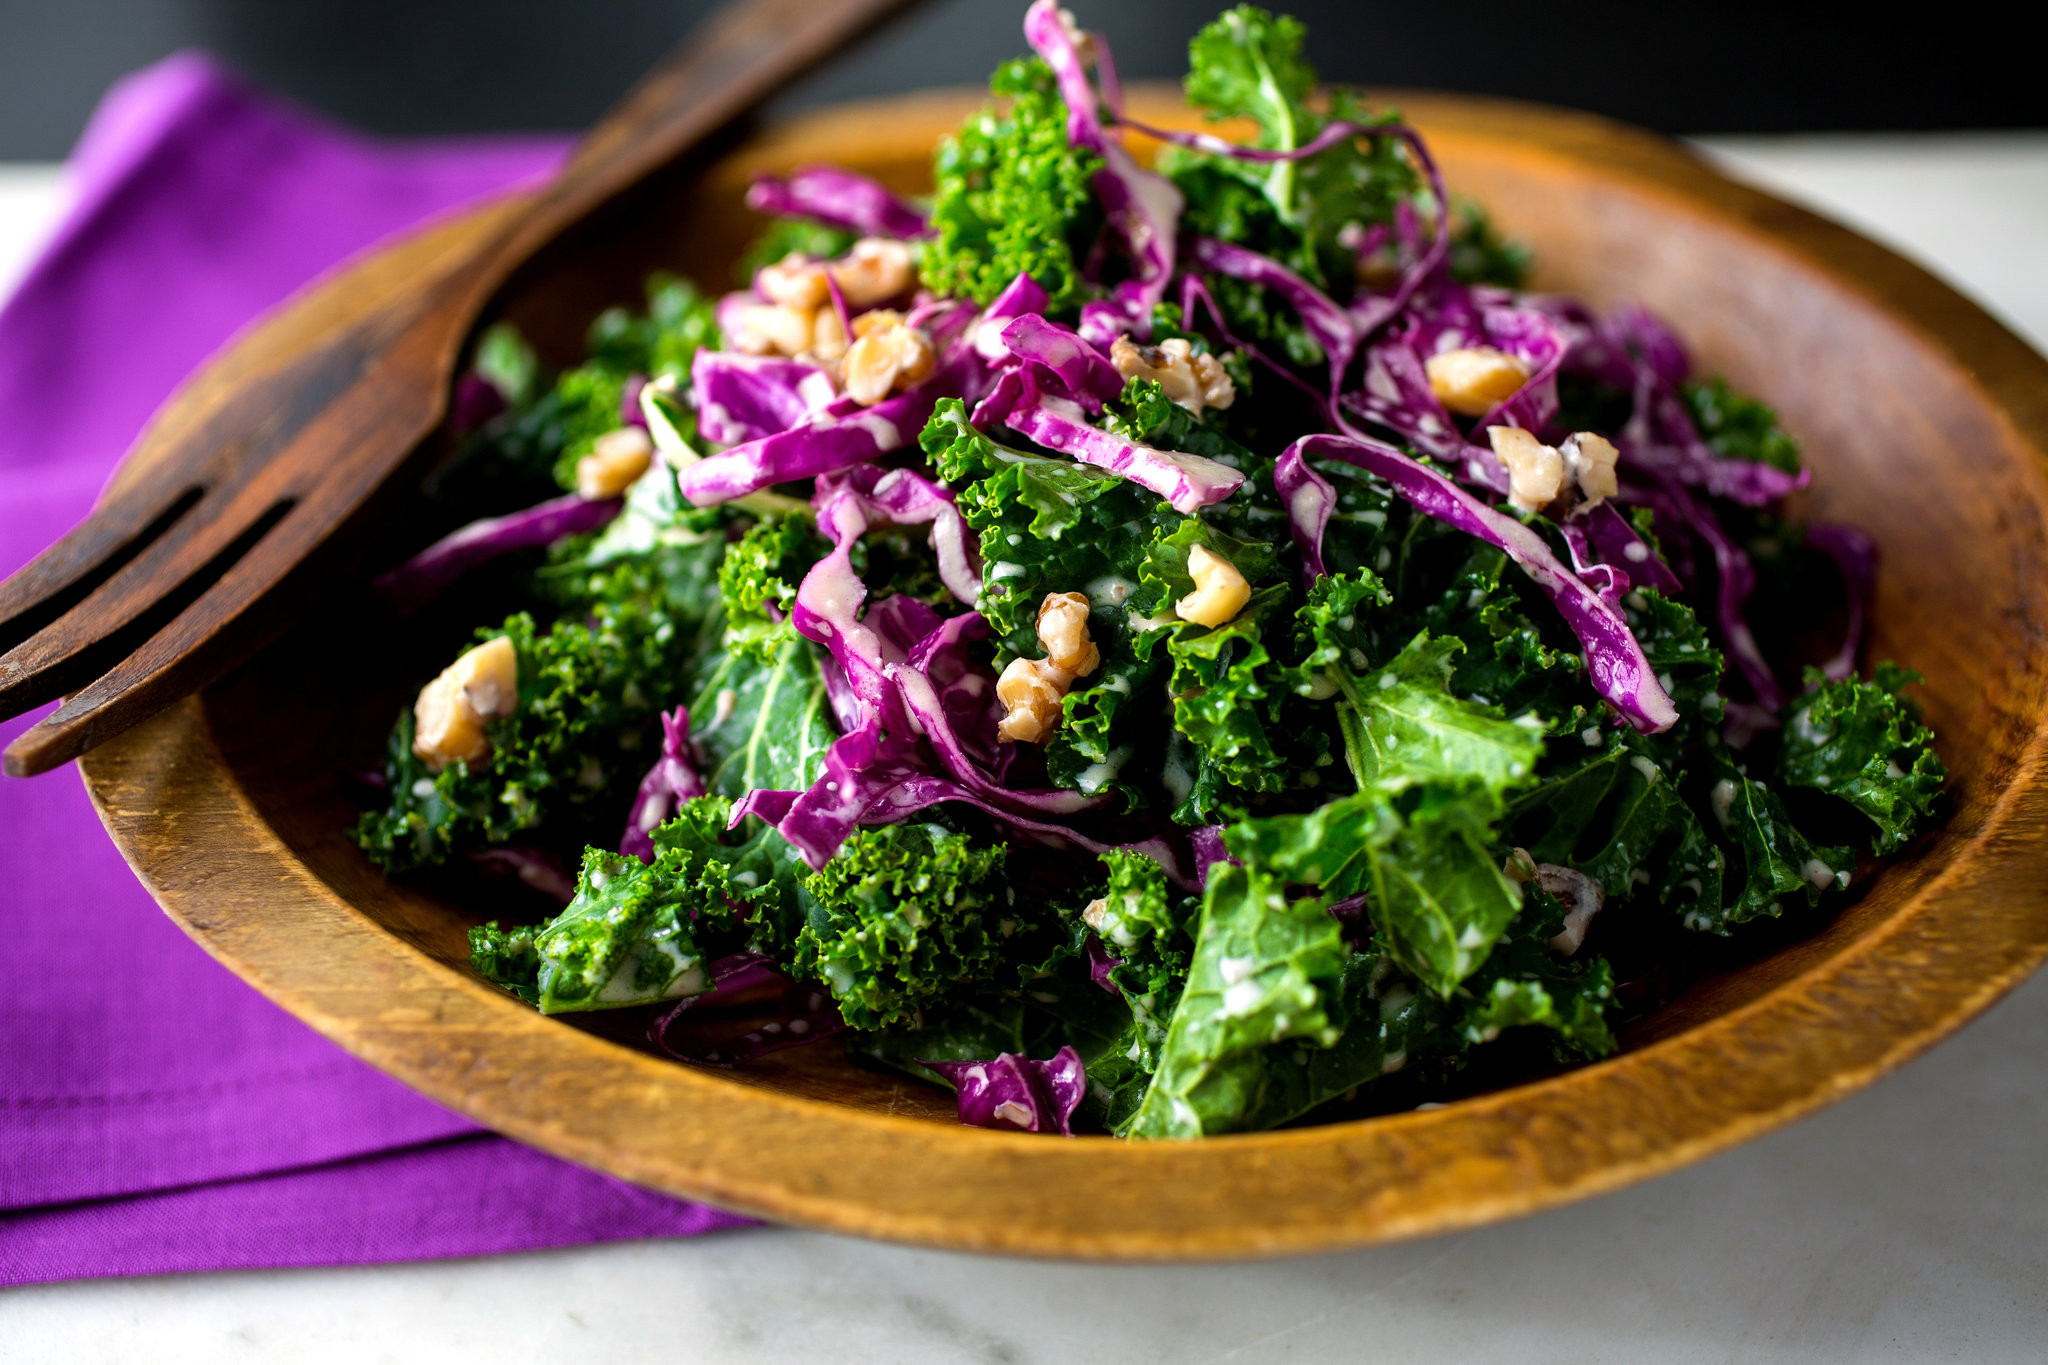 Healthy Red Cabbage Recipes
 Kale and Red Cabbage Slaw With Walnuts Recipe NYT Cooking